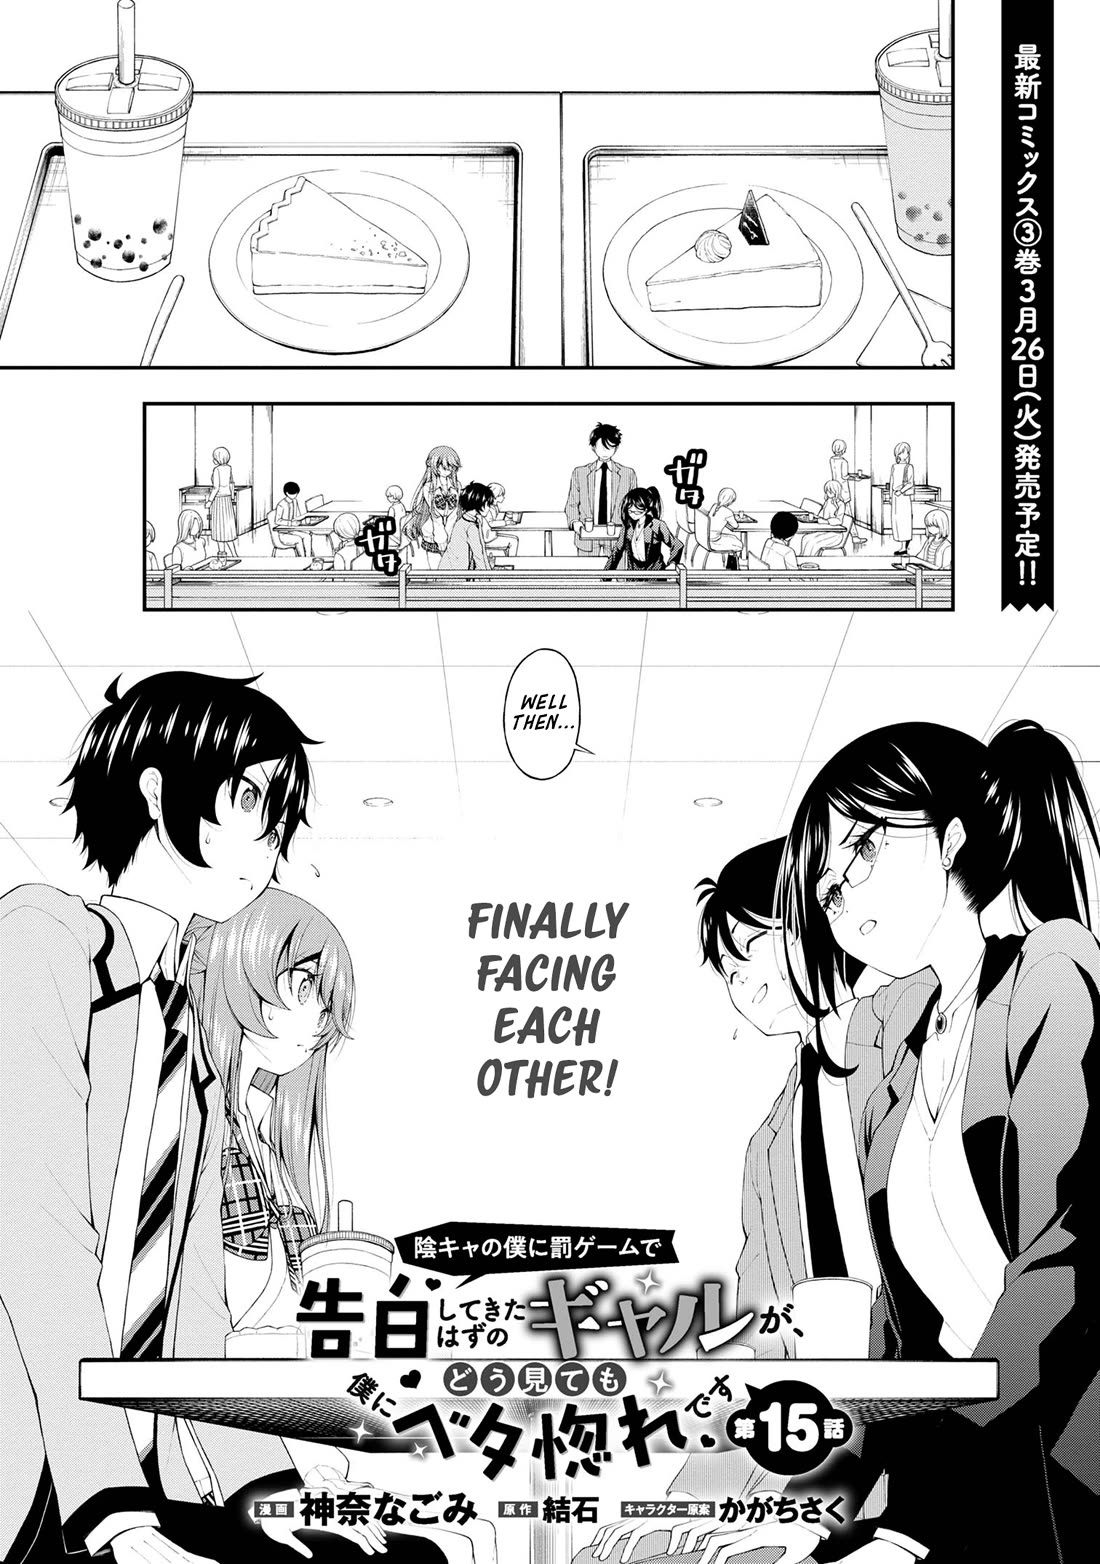 The Gal Who Was Meant to Confess to Me as a Game Punishment - chapter 15 - #1